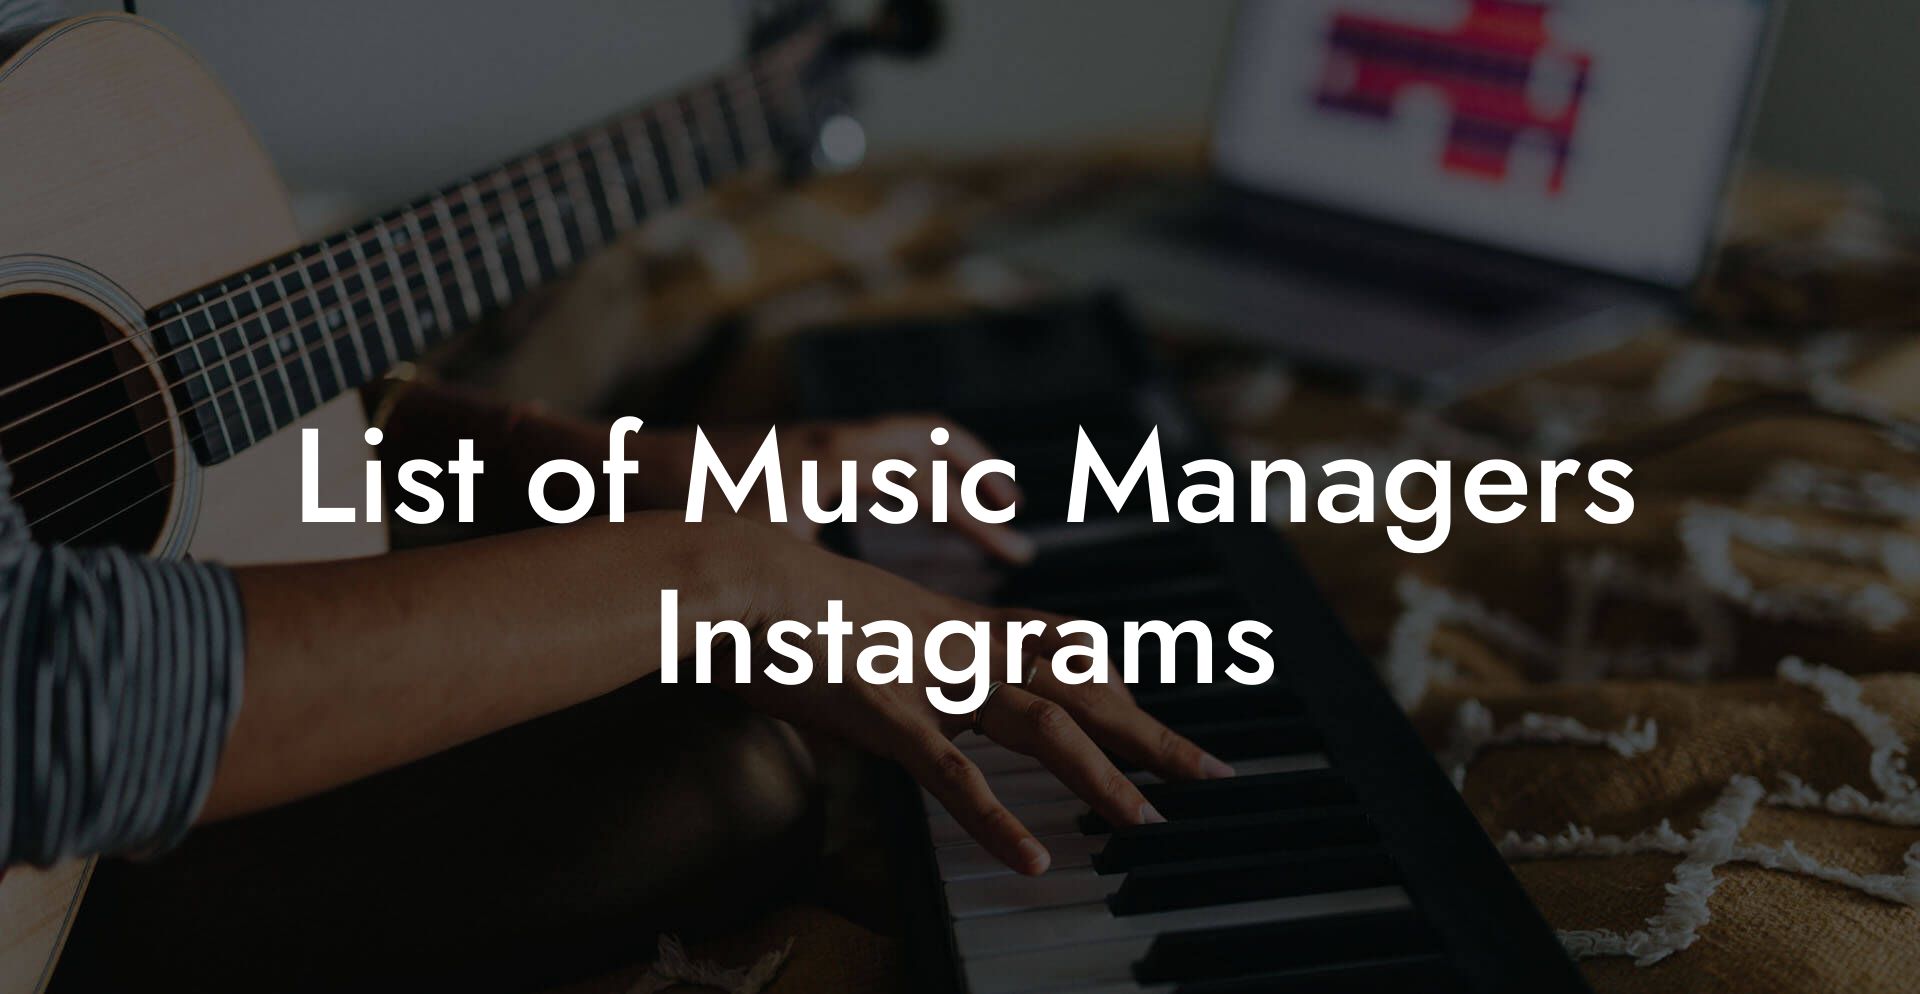 List of Music Managers Instagrams